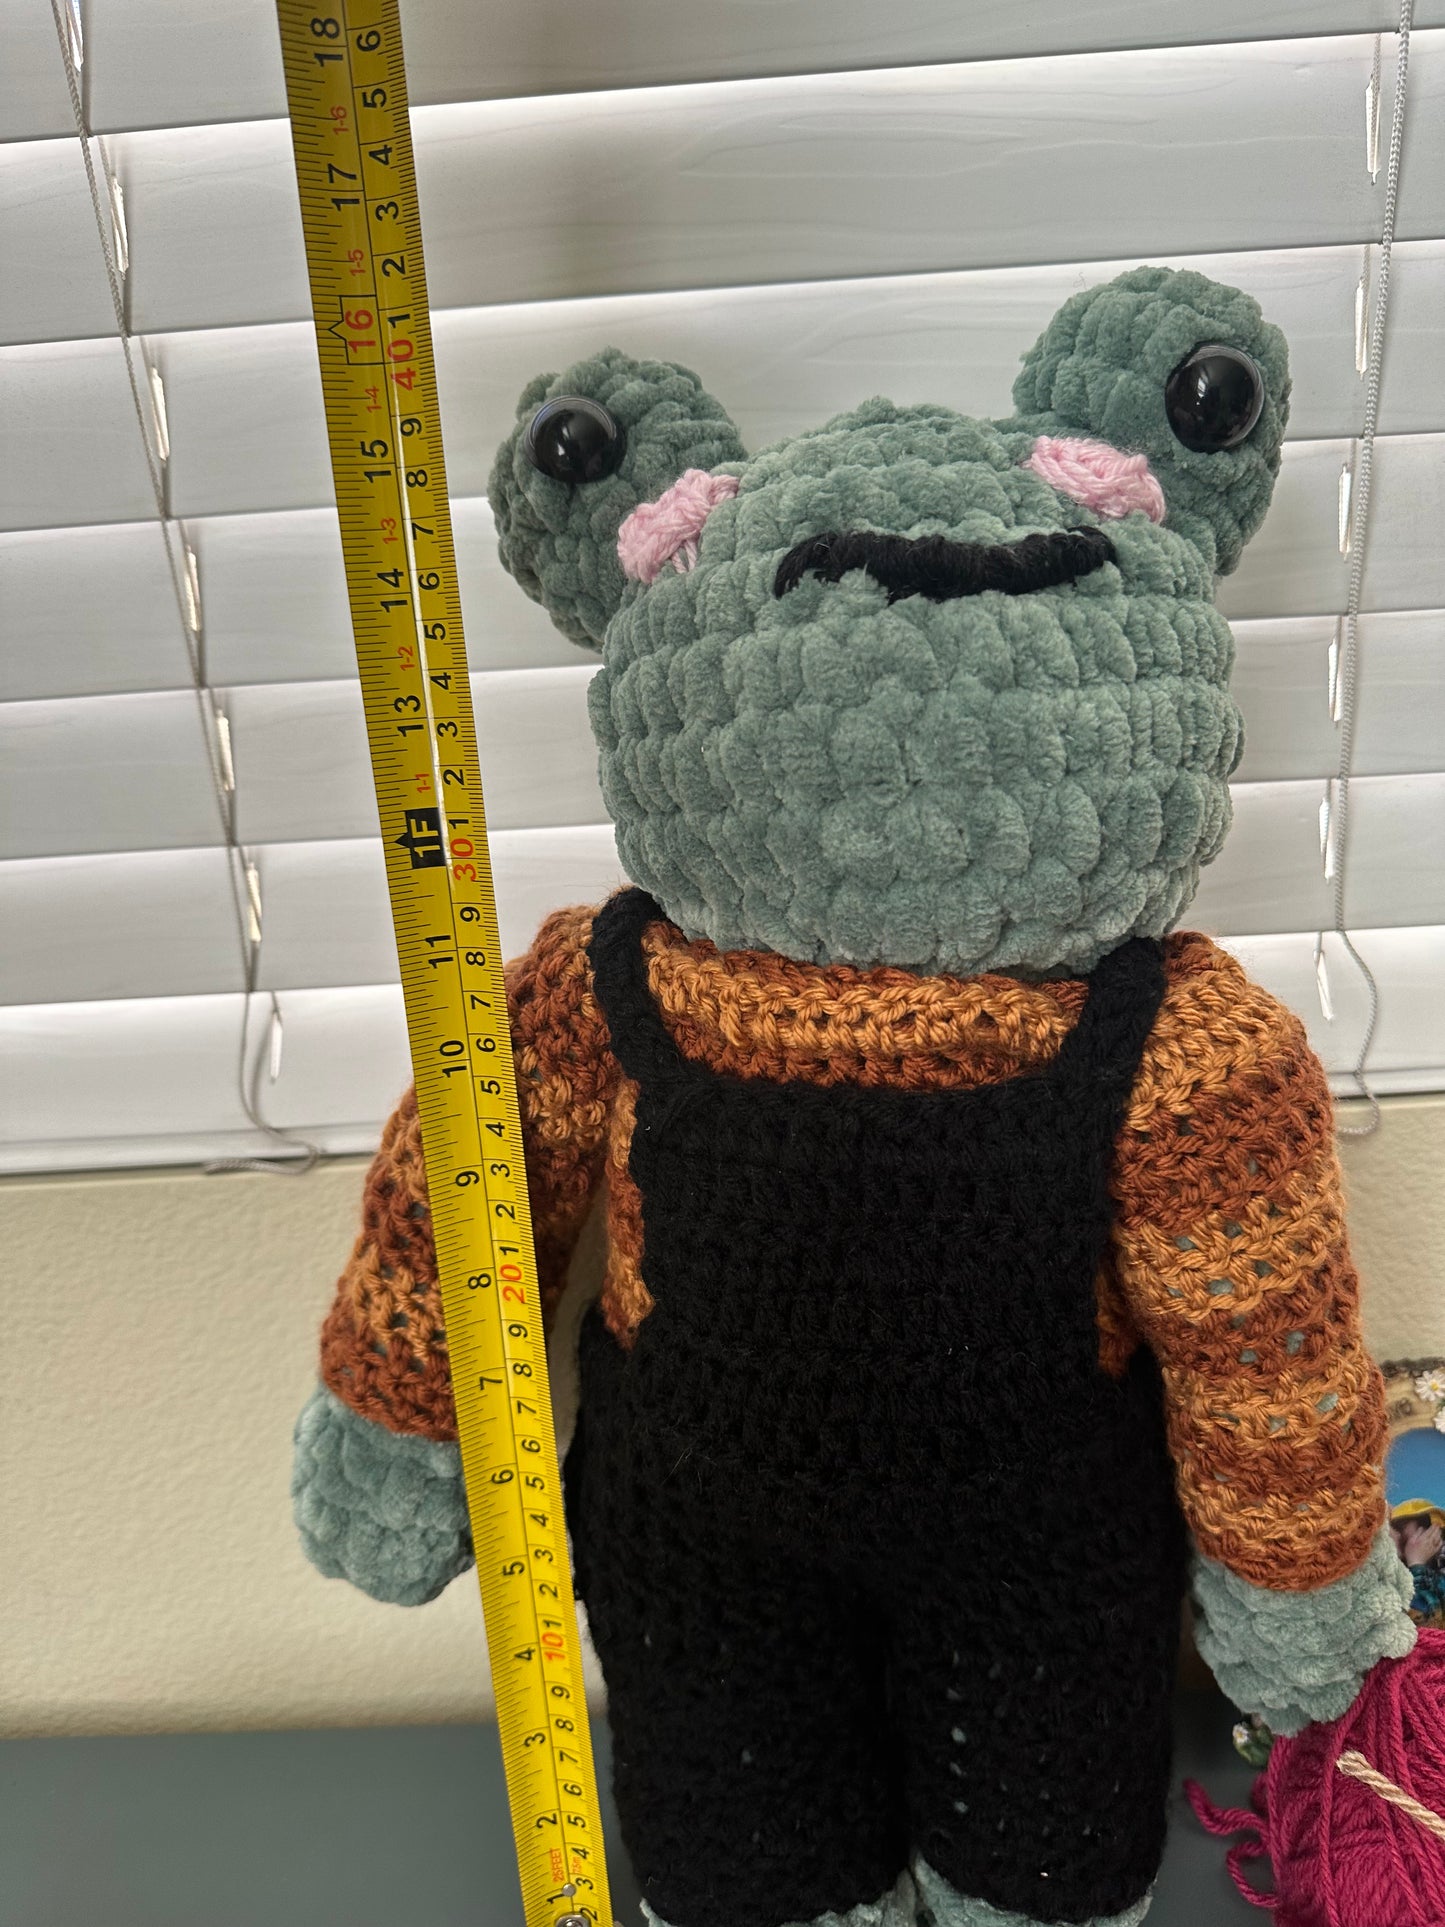 Crocheted Funky Fall Frog plushie